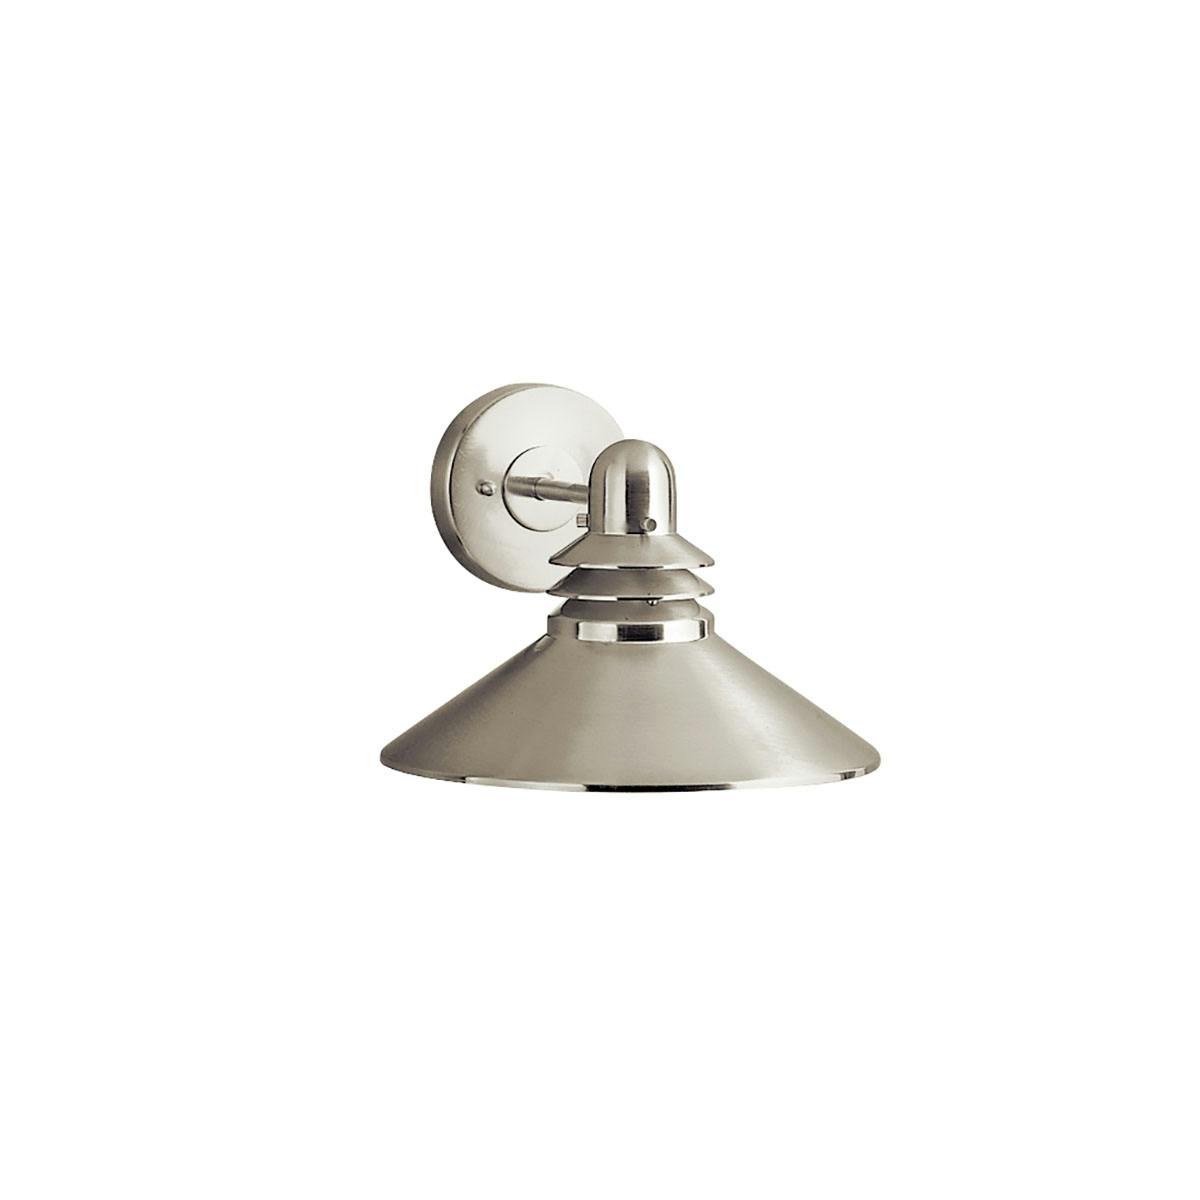 Grenoble 1 Light Wall Light Nickel on a white background